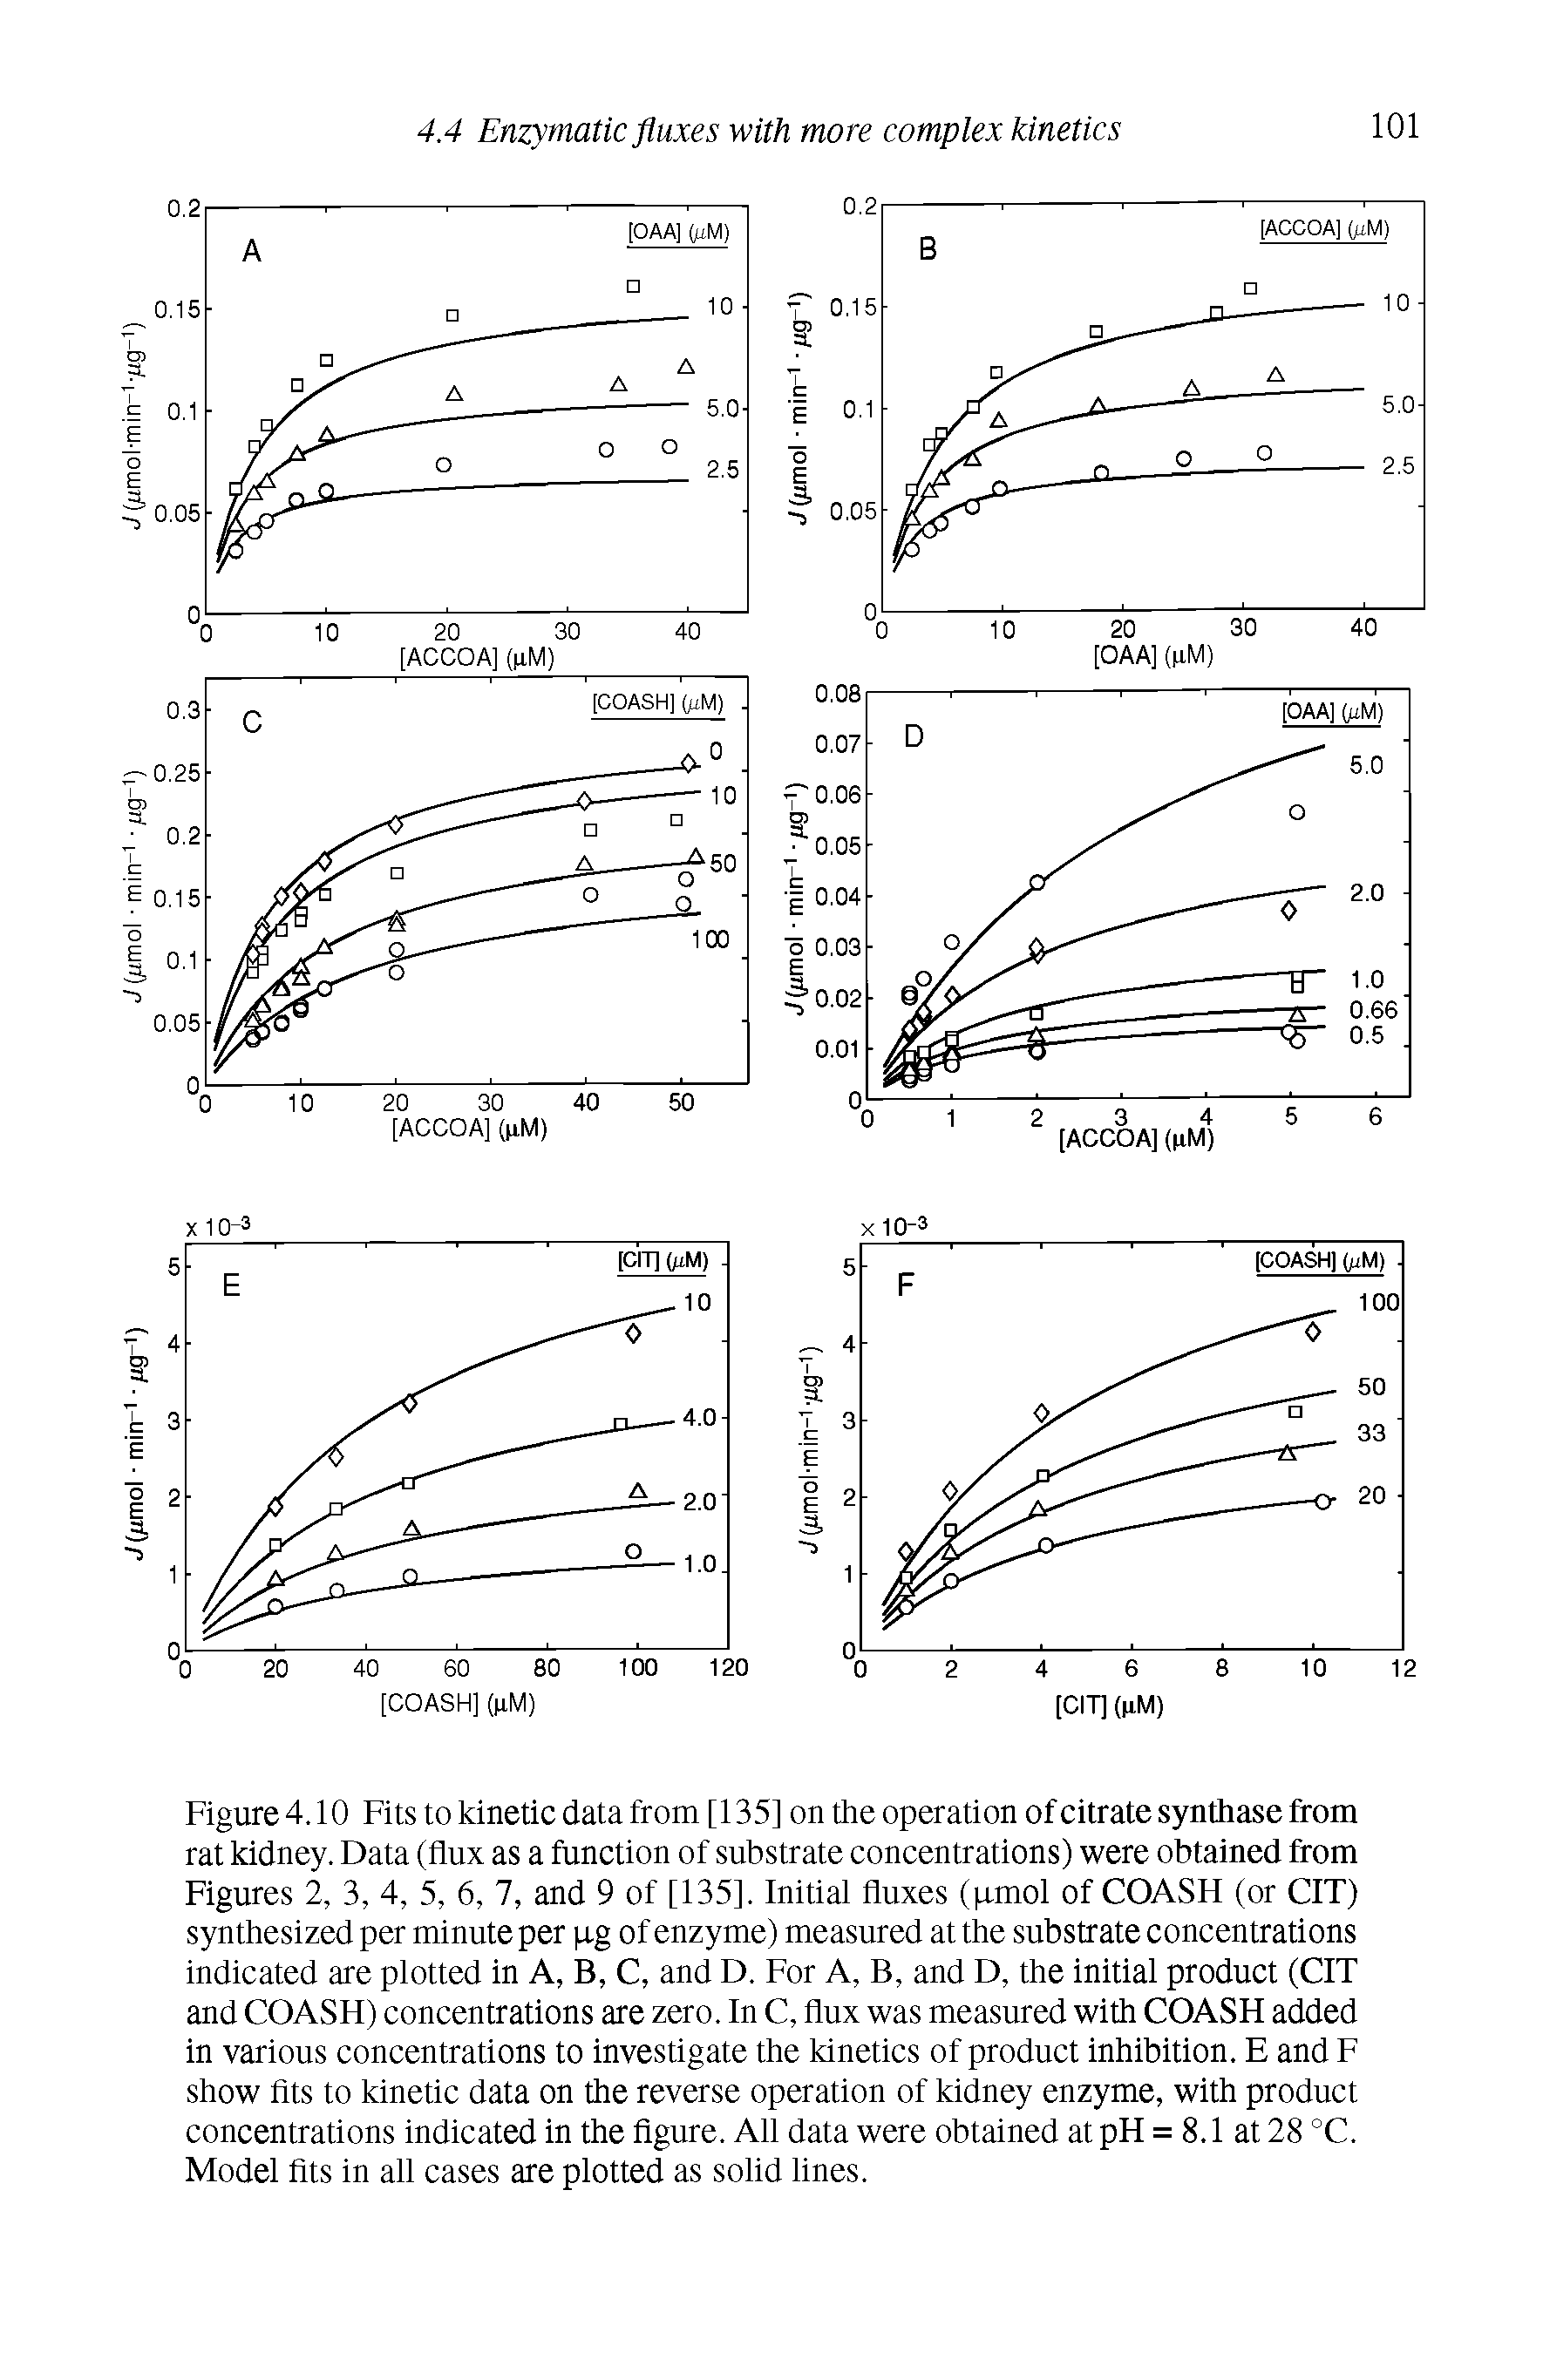 Figure 4.10 Fits to kinetic data from [135] on the operation of citrate synthase from rat kidney. Data (flux as a function of substrate concentrations) were obtained from Figures 2, 3, 4, 5, 6, 7, and 9 of [135], Initial fluxes (p.mol of COASH (or CIT) synthesized per minute per ug of enzyme) measured at the substrate concentrations indicated are plotted in A, B, C, and D. For A, B, and D, the initial product (CIT and COASH) concentrations are zero. In C, flux was measured with COASH added in various concentrations to investigate the kinetics of product inhibition. E and F show fits to kinetic data on the reverse operation of kidney enzyme, with product concentrations indicated in the figure. All data were obtained at pH = 8.1 at 28 °C. Model fits in all cases are plotted as solid lines.